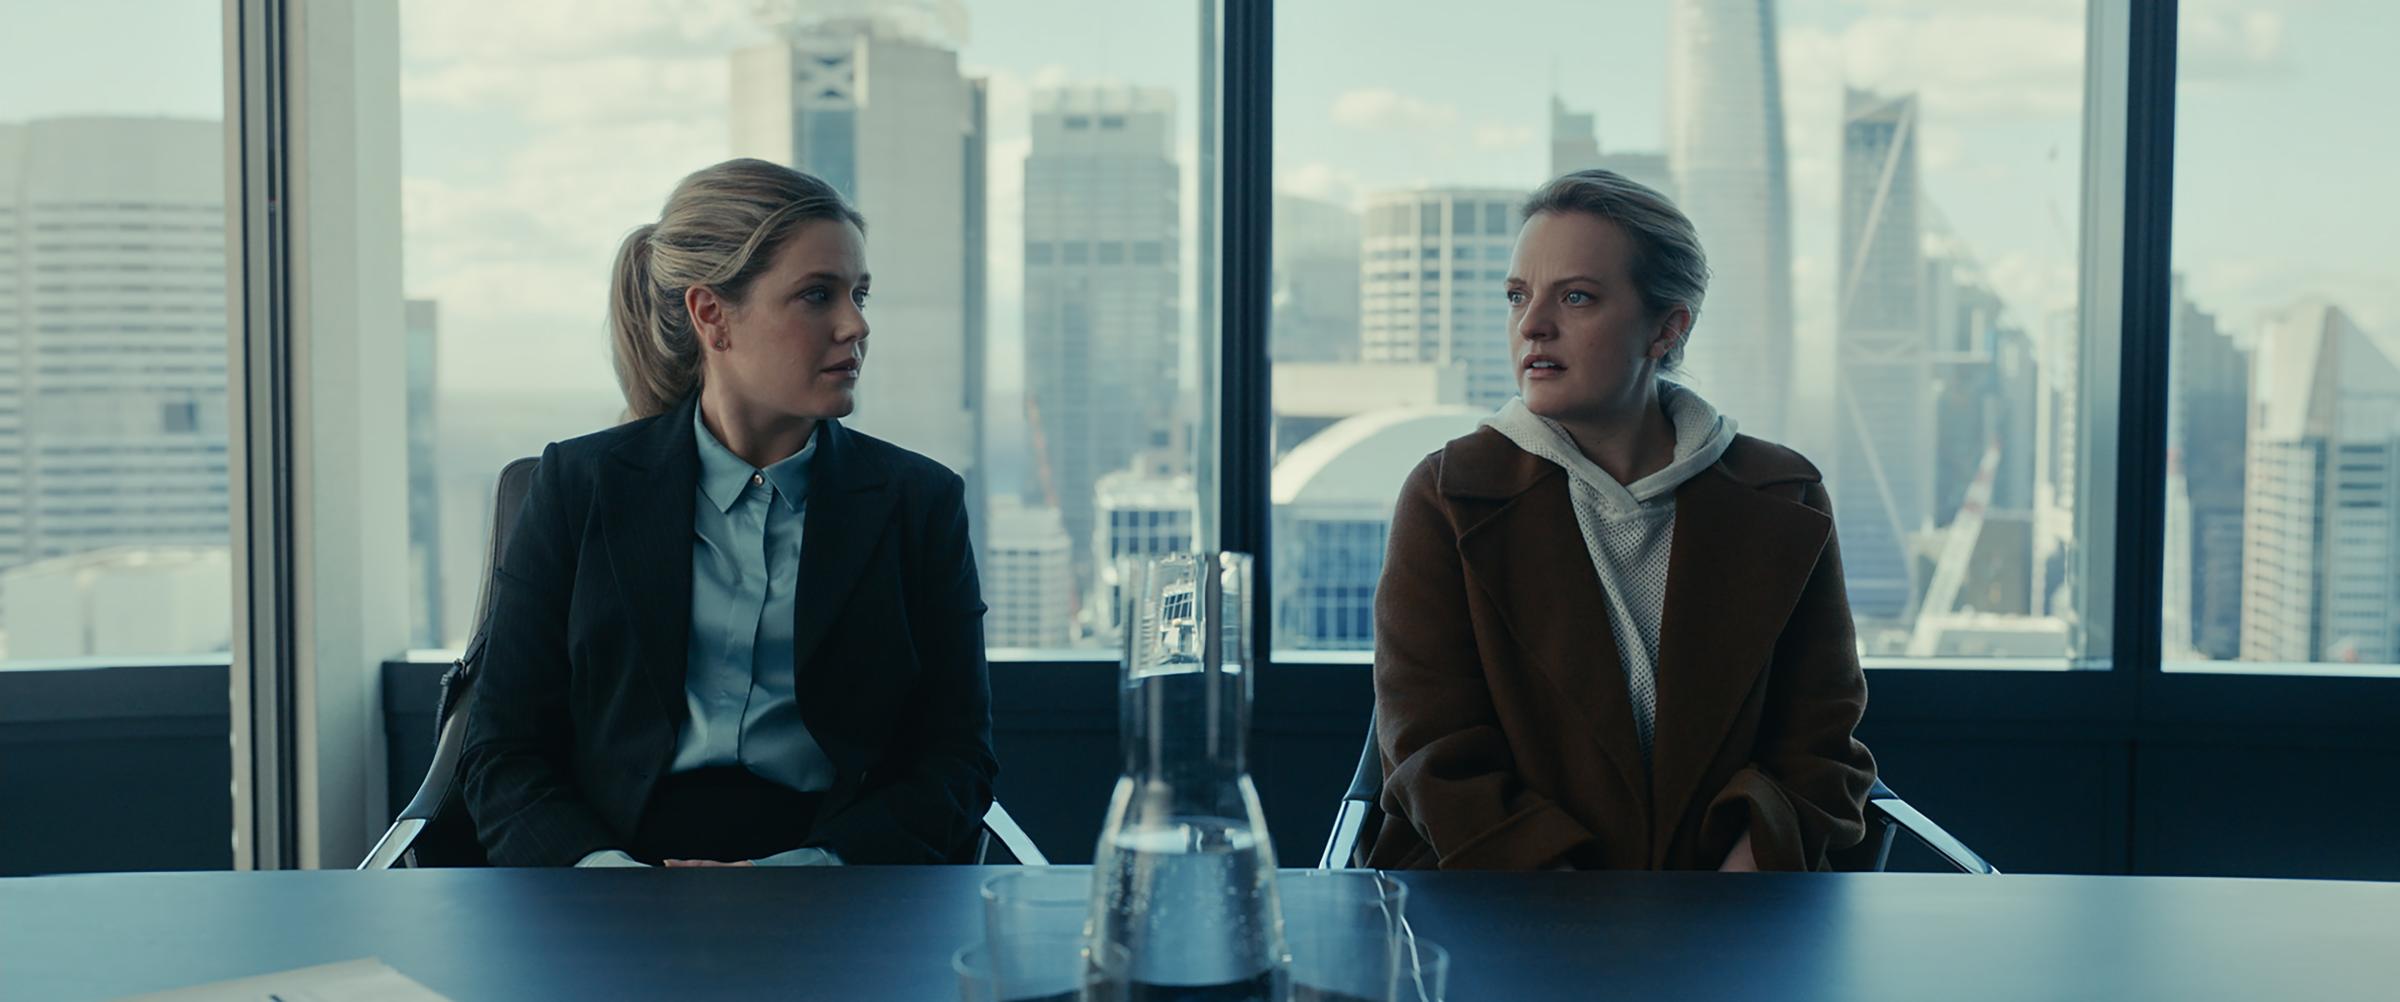 Emily Kass (Harriet Dyer) and Cecilia Kass (Elisabeth Moss) in "The Invisible Man," written and directed by Leigh Whannell.